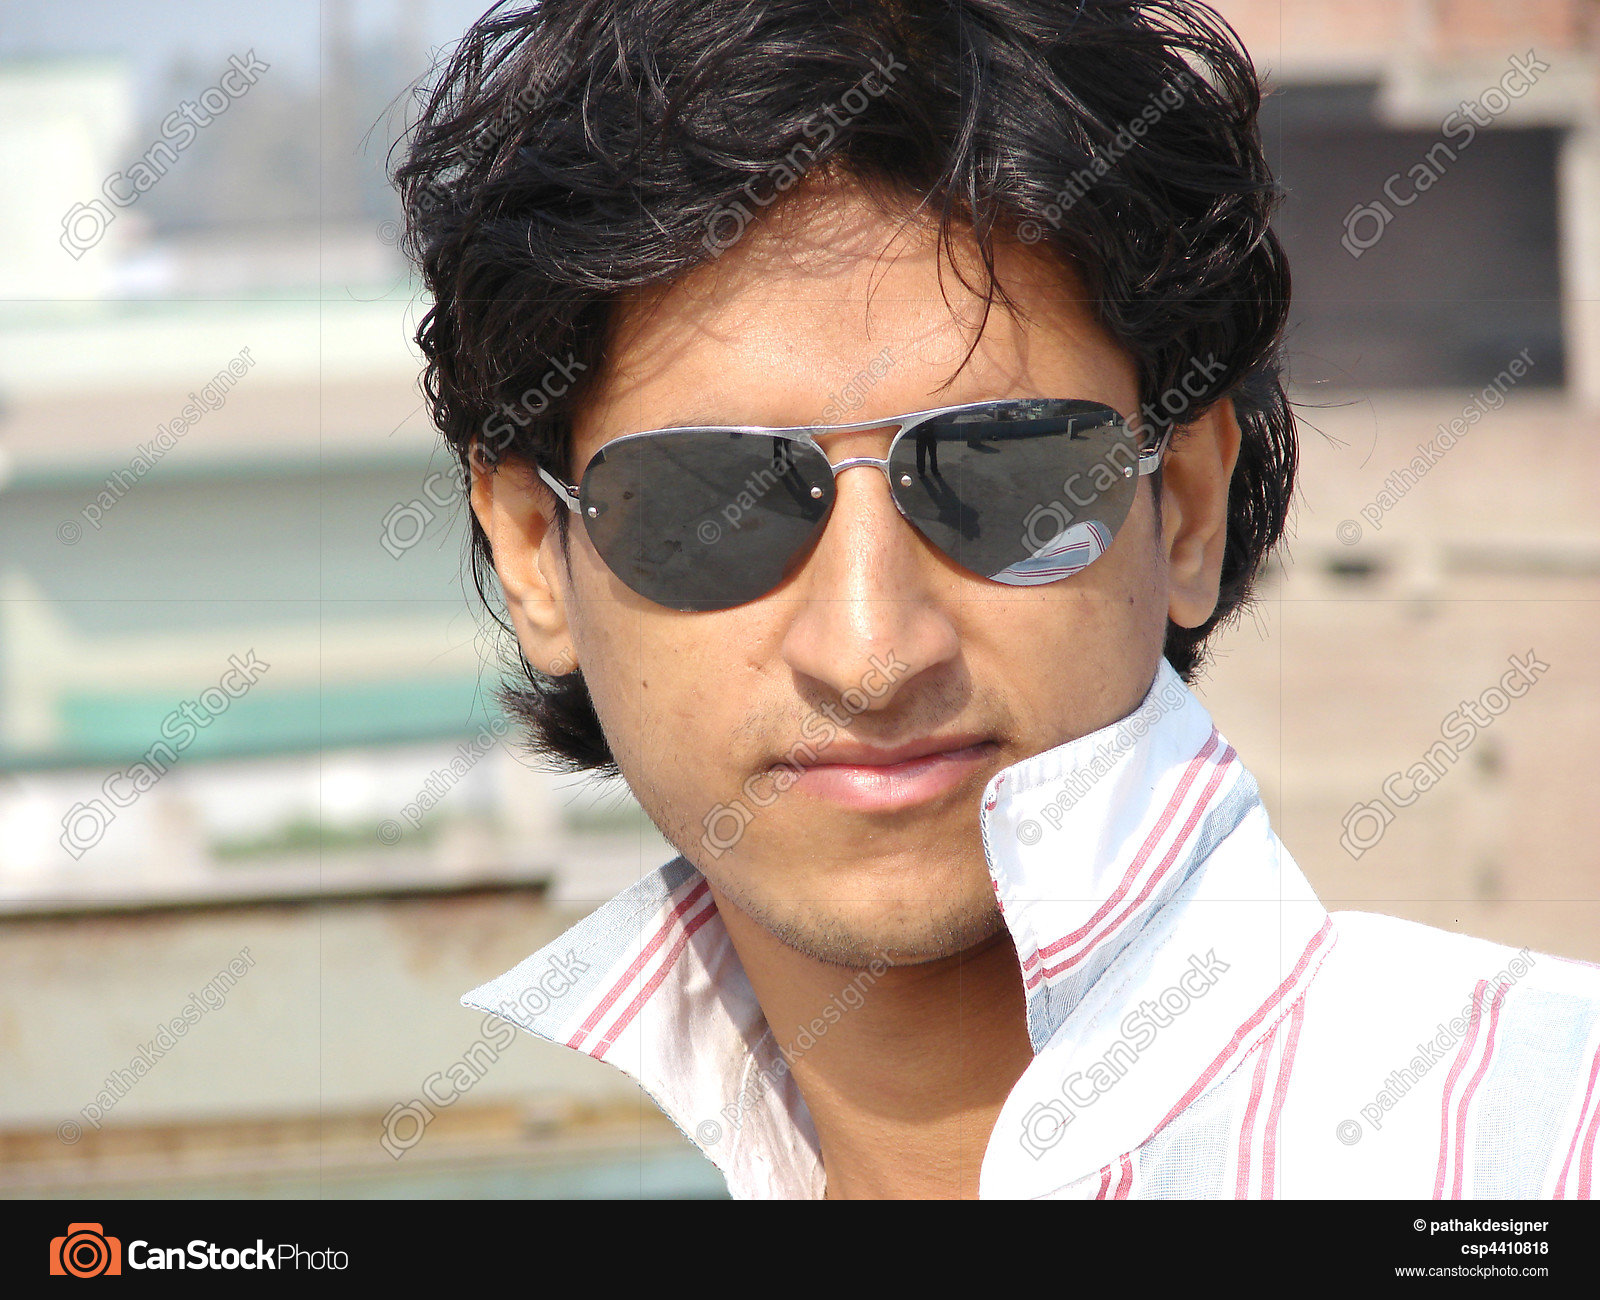 Portrait of a young indian man wearing glasses pictures - Search ...